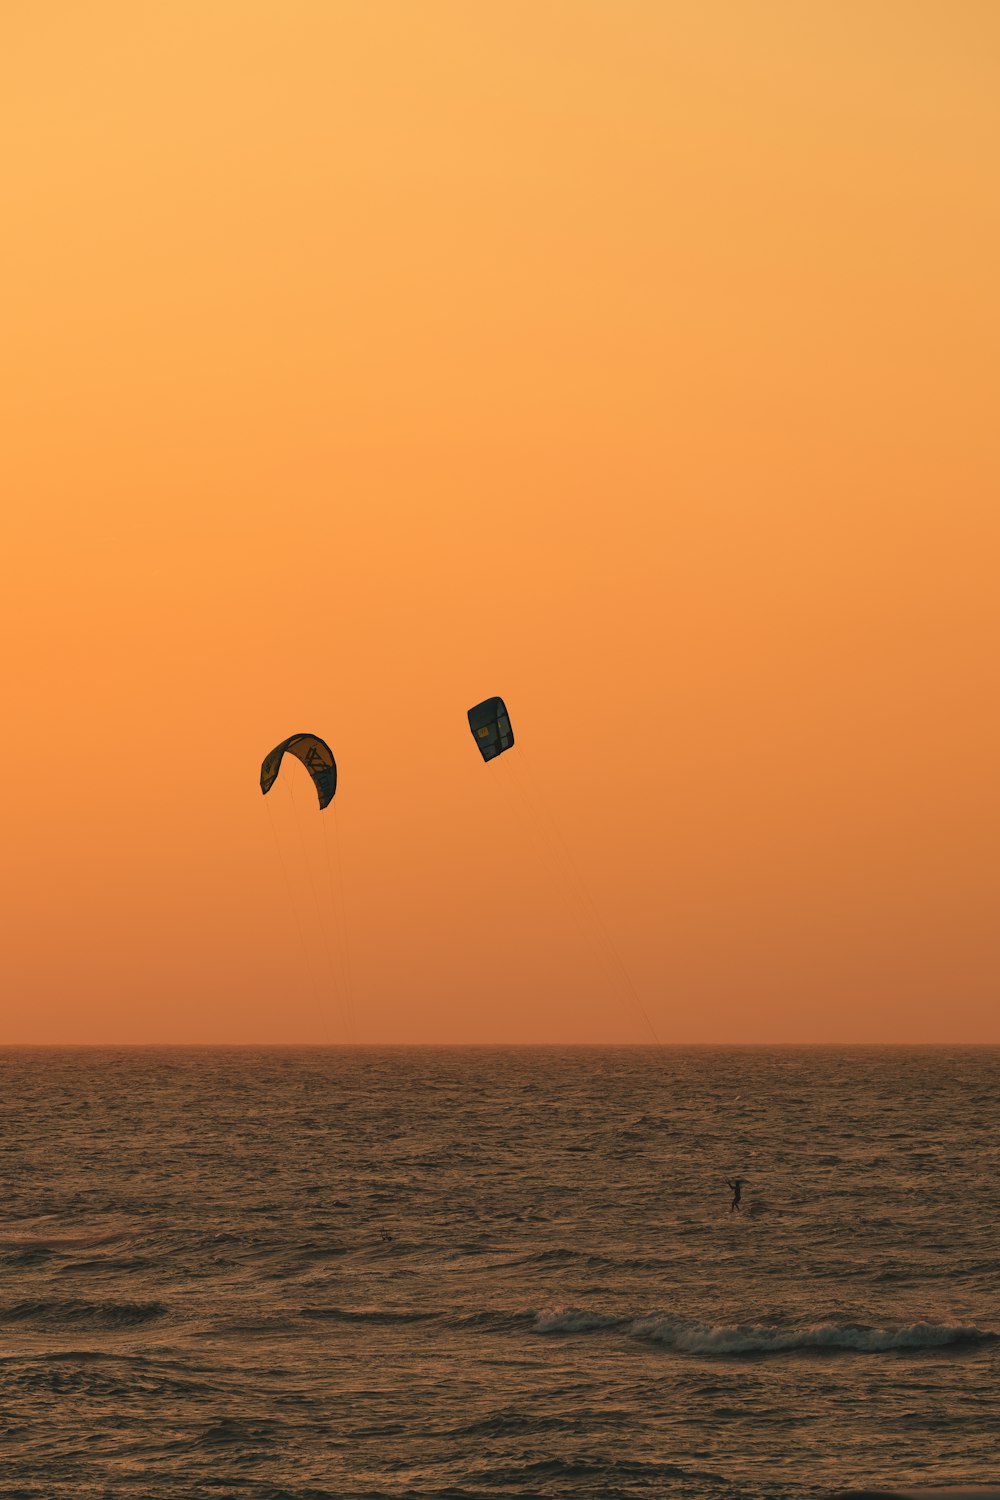 a couple of kites flying over the ocean at sunset